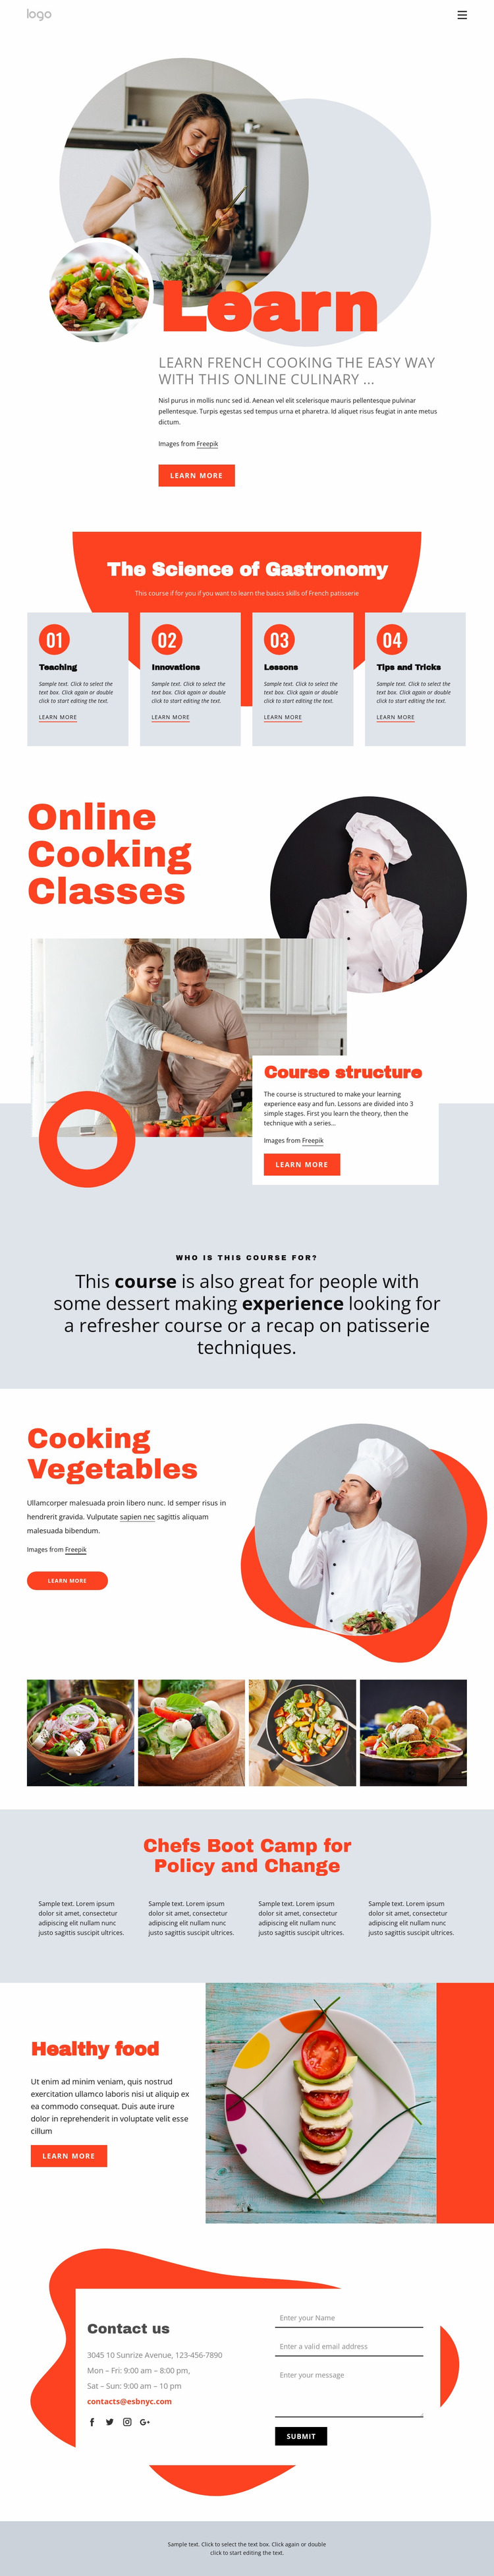 Learn cooking the easy way Website Mockup